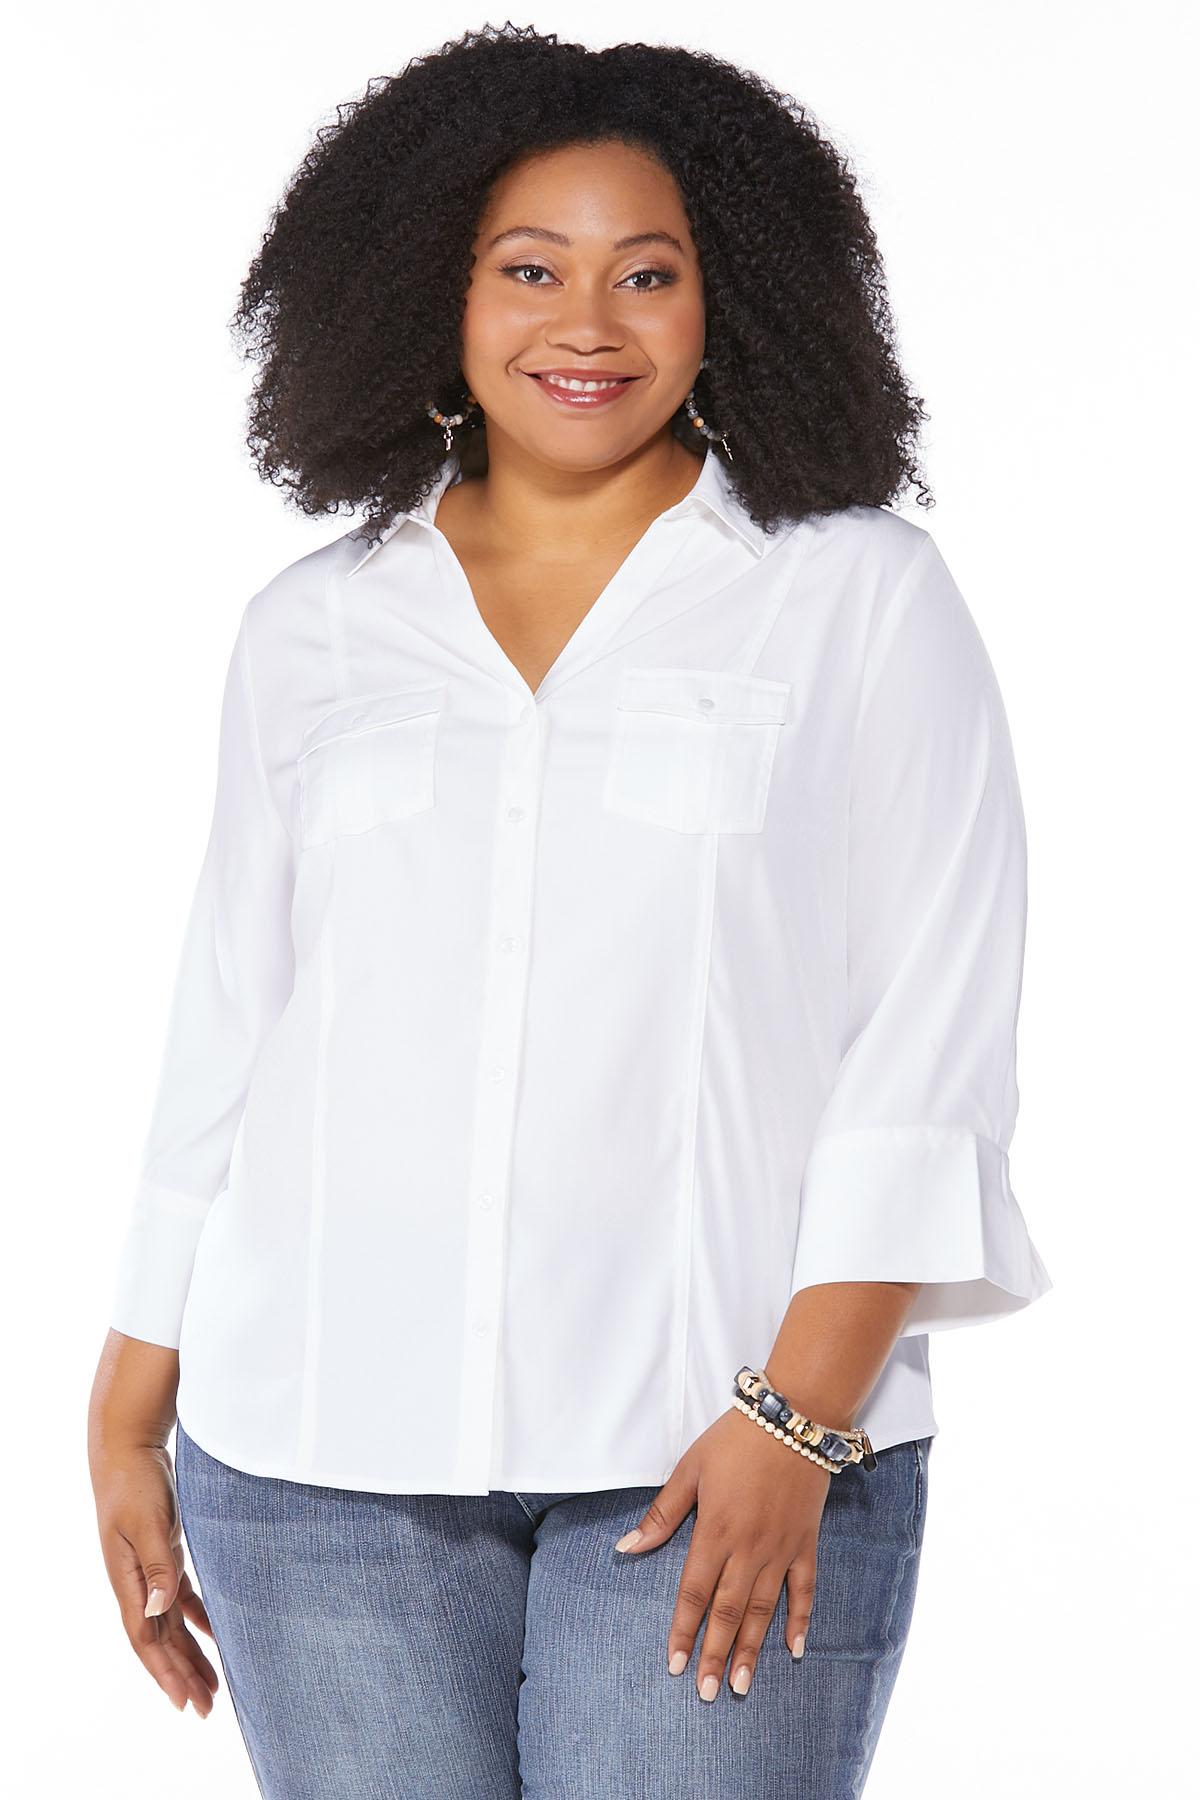 womens plus size tops 26/28 